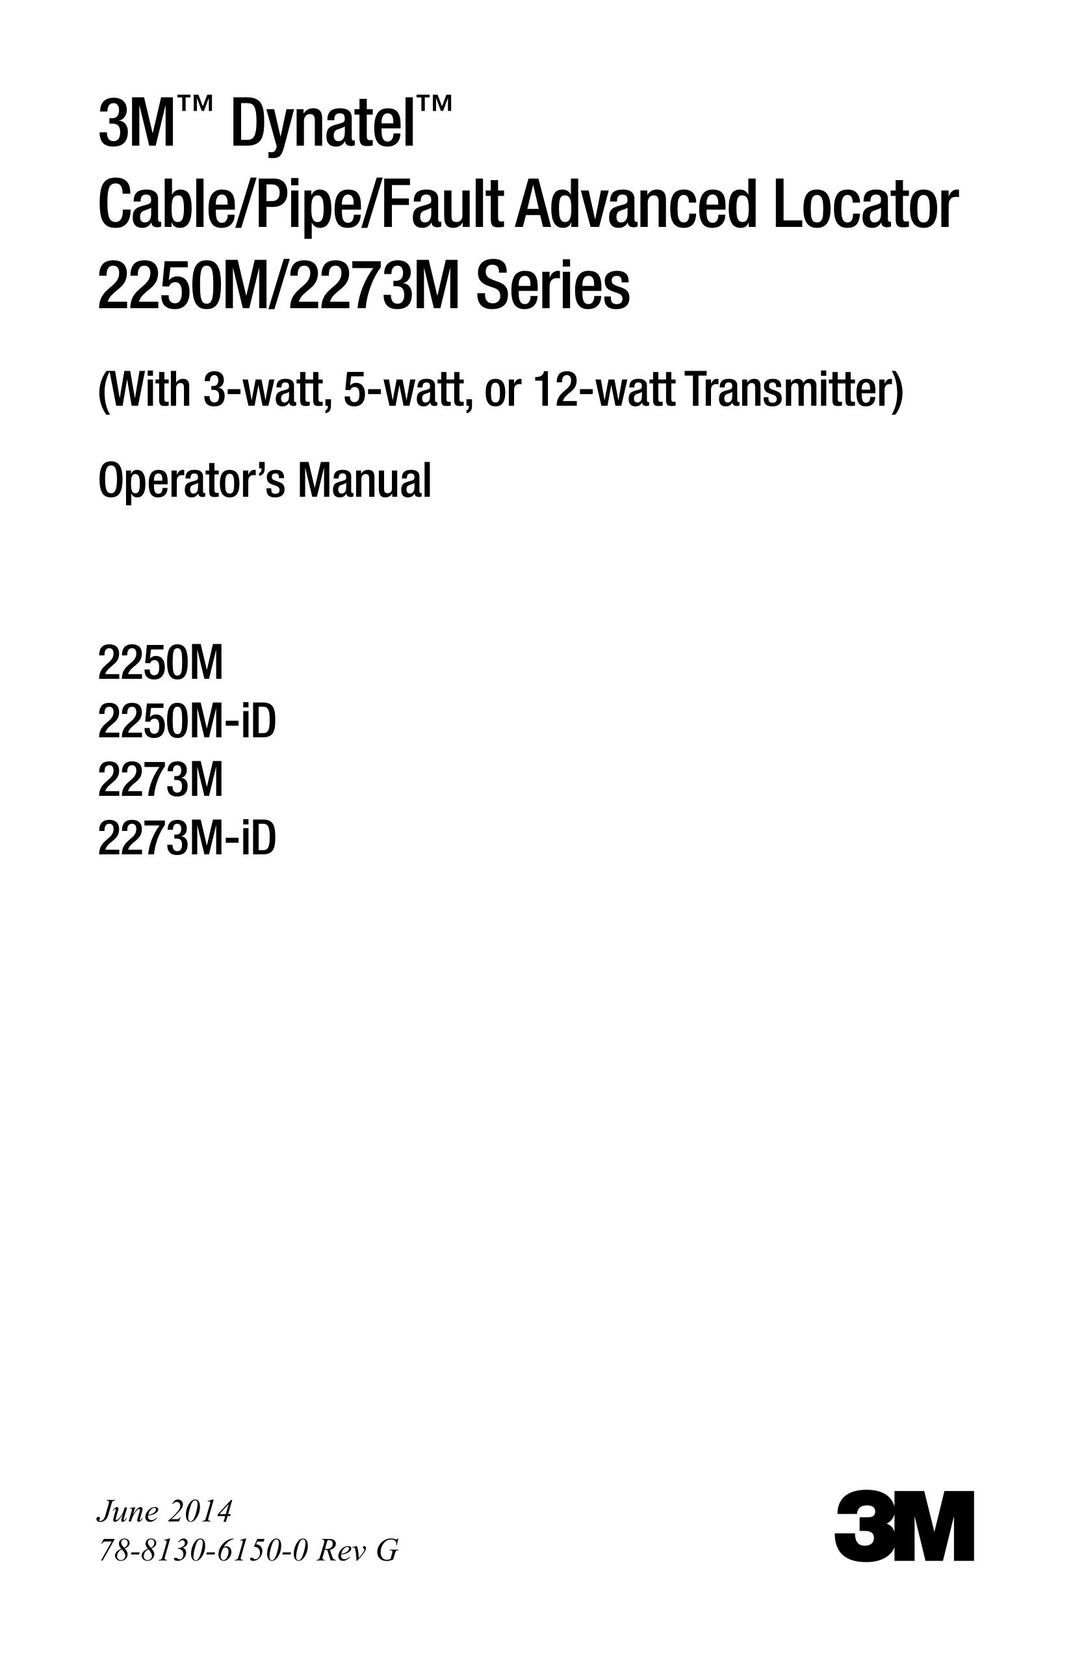 3M 2250M-iD Cable Box User Manual